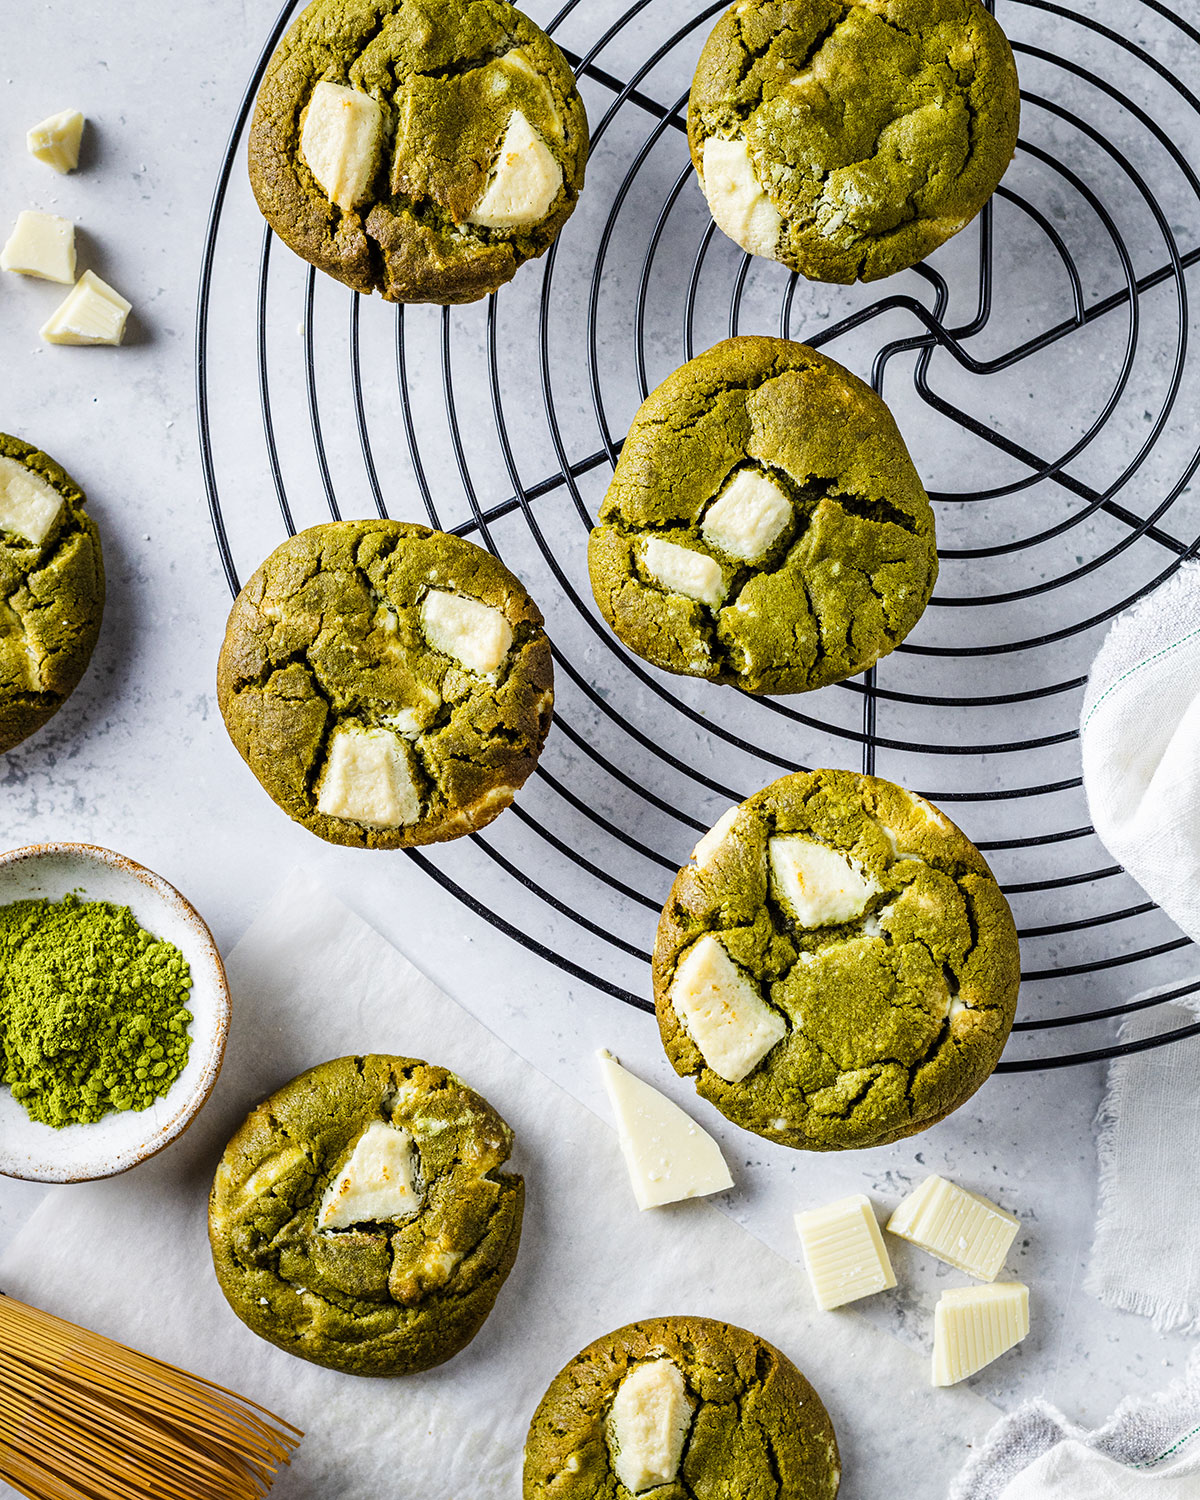 Baked Matcha green tea cookies it's white chocolate chips on a round cooling rack surrounded by ingredients such as white chocolate chips and green tea powder in a pinch pot